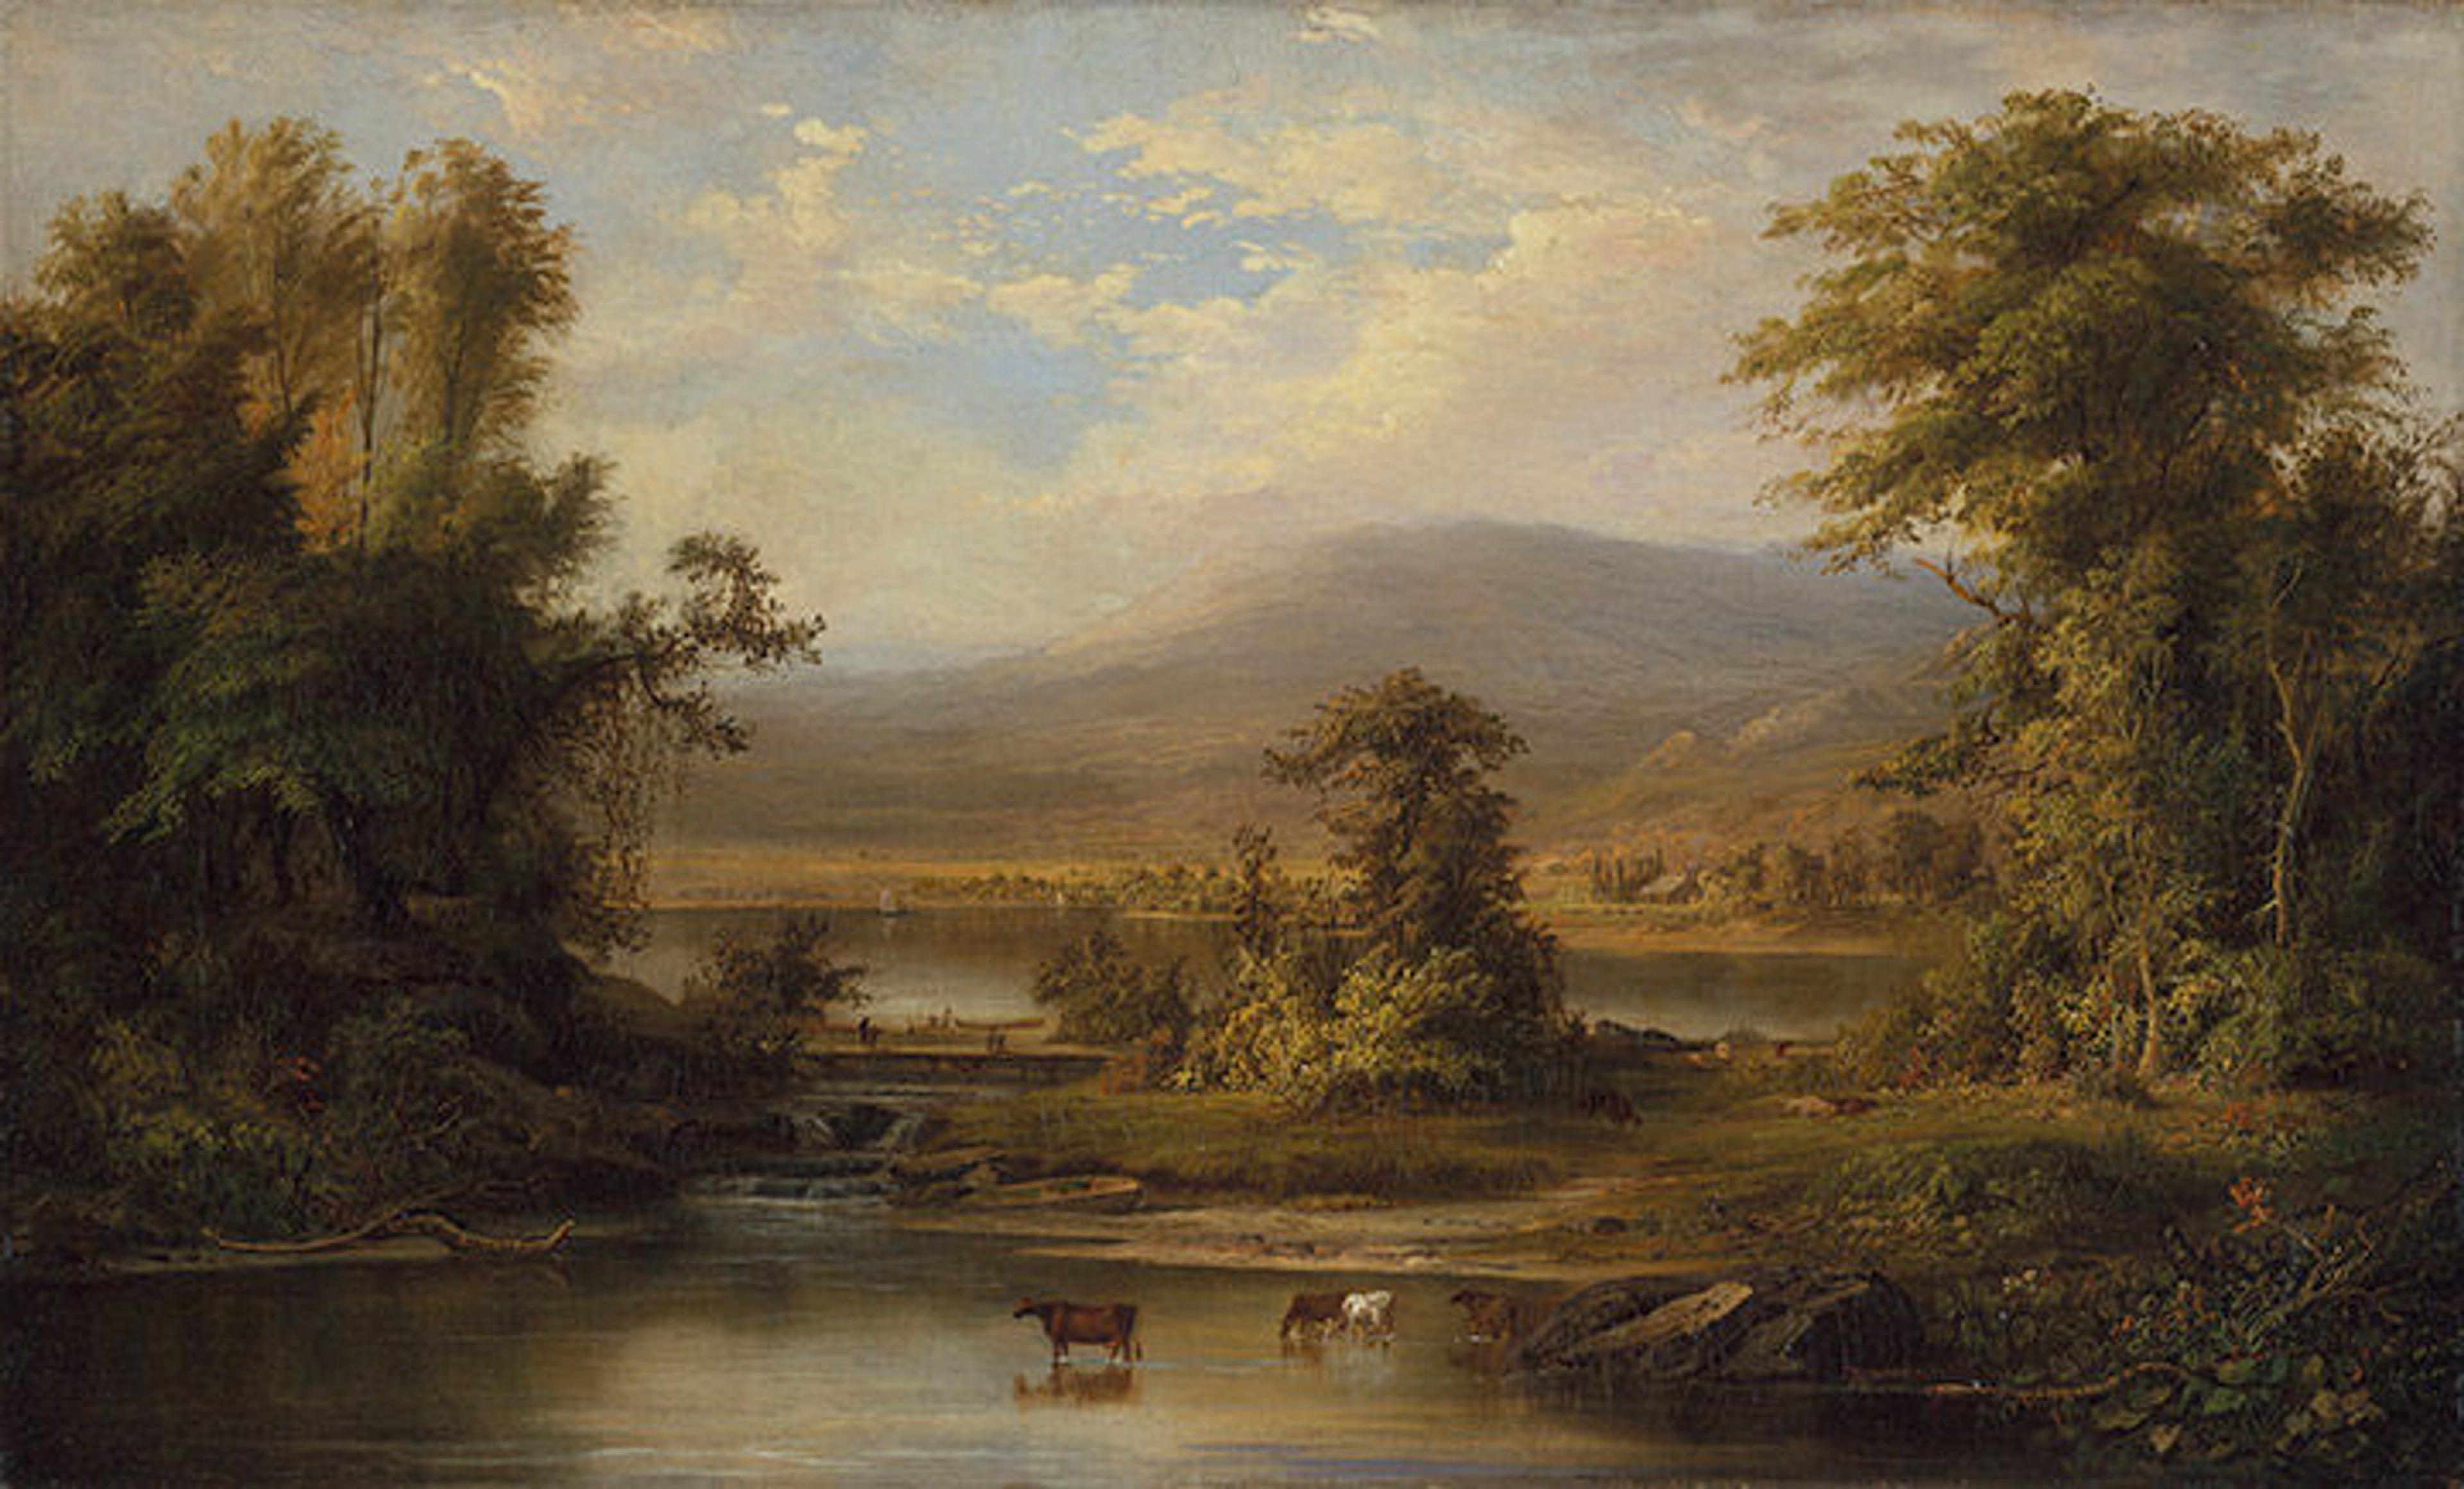 A pastoral scene shows cows wading in a stream in the foreground. In the middle ground are trees, cows resting, and people on a bridge. A cabin sits at the base of a mountain pictured in the background. 